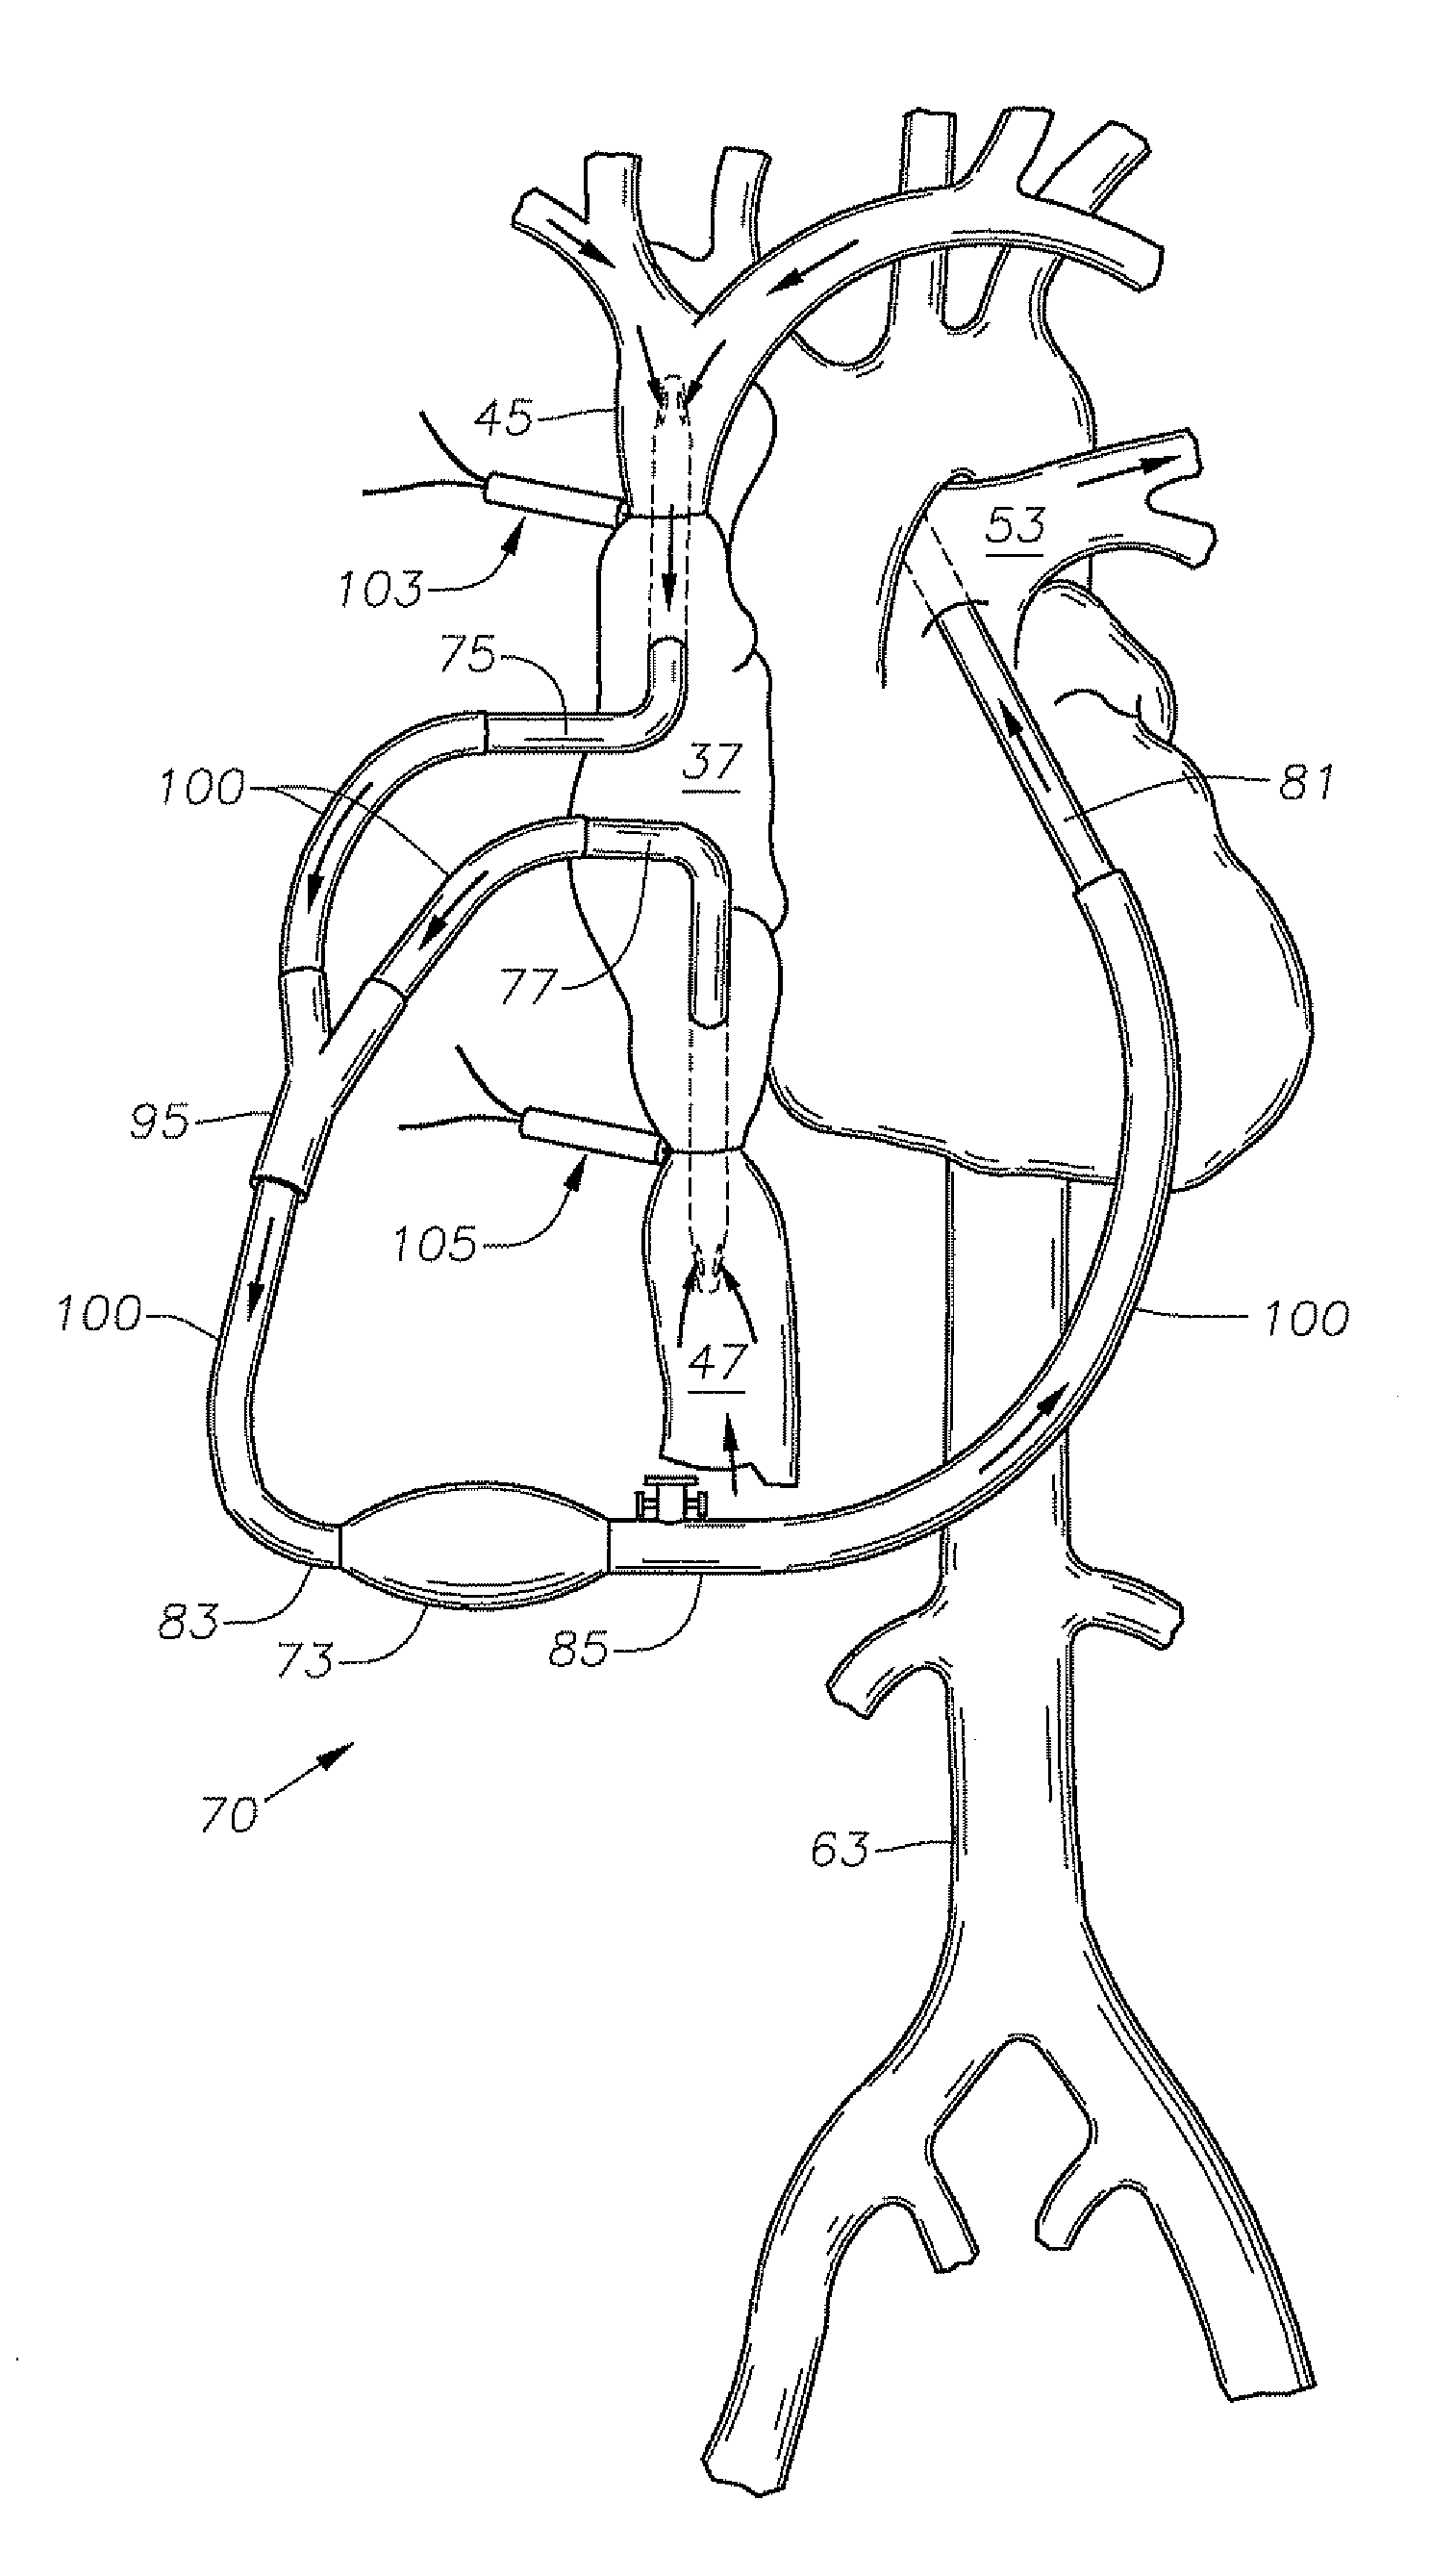 Heart pump apparatus and method for beating heart surgery